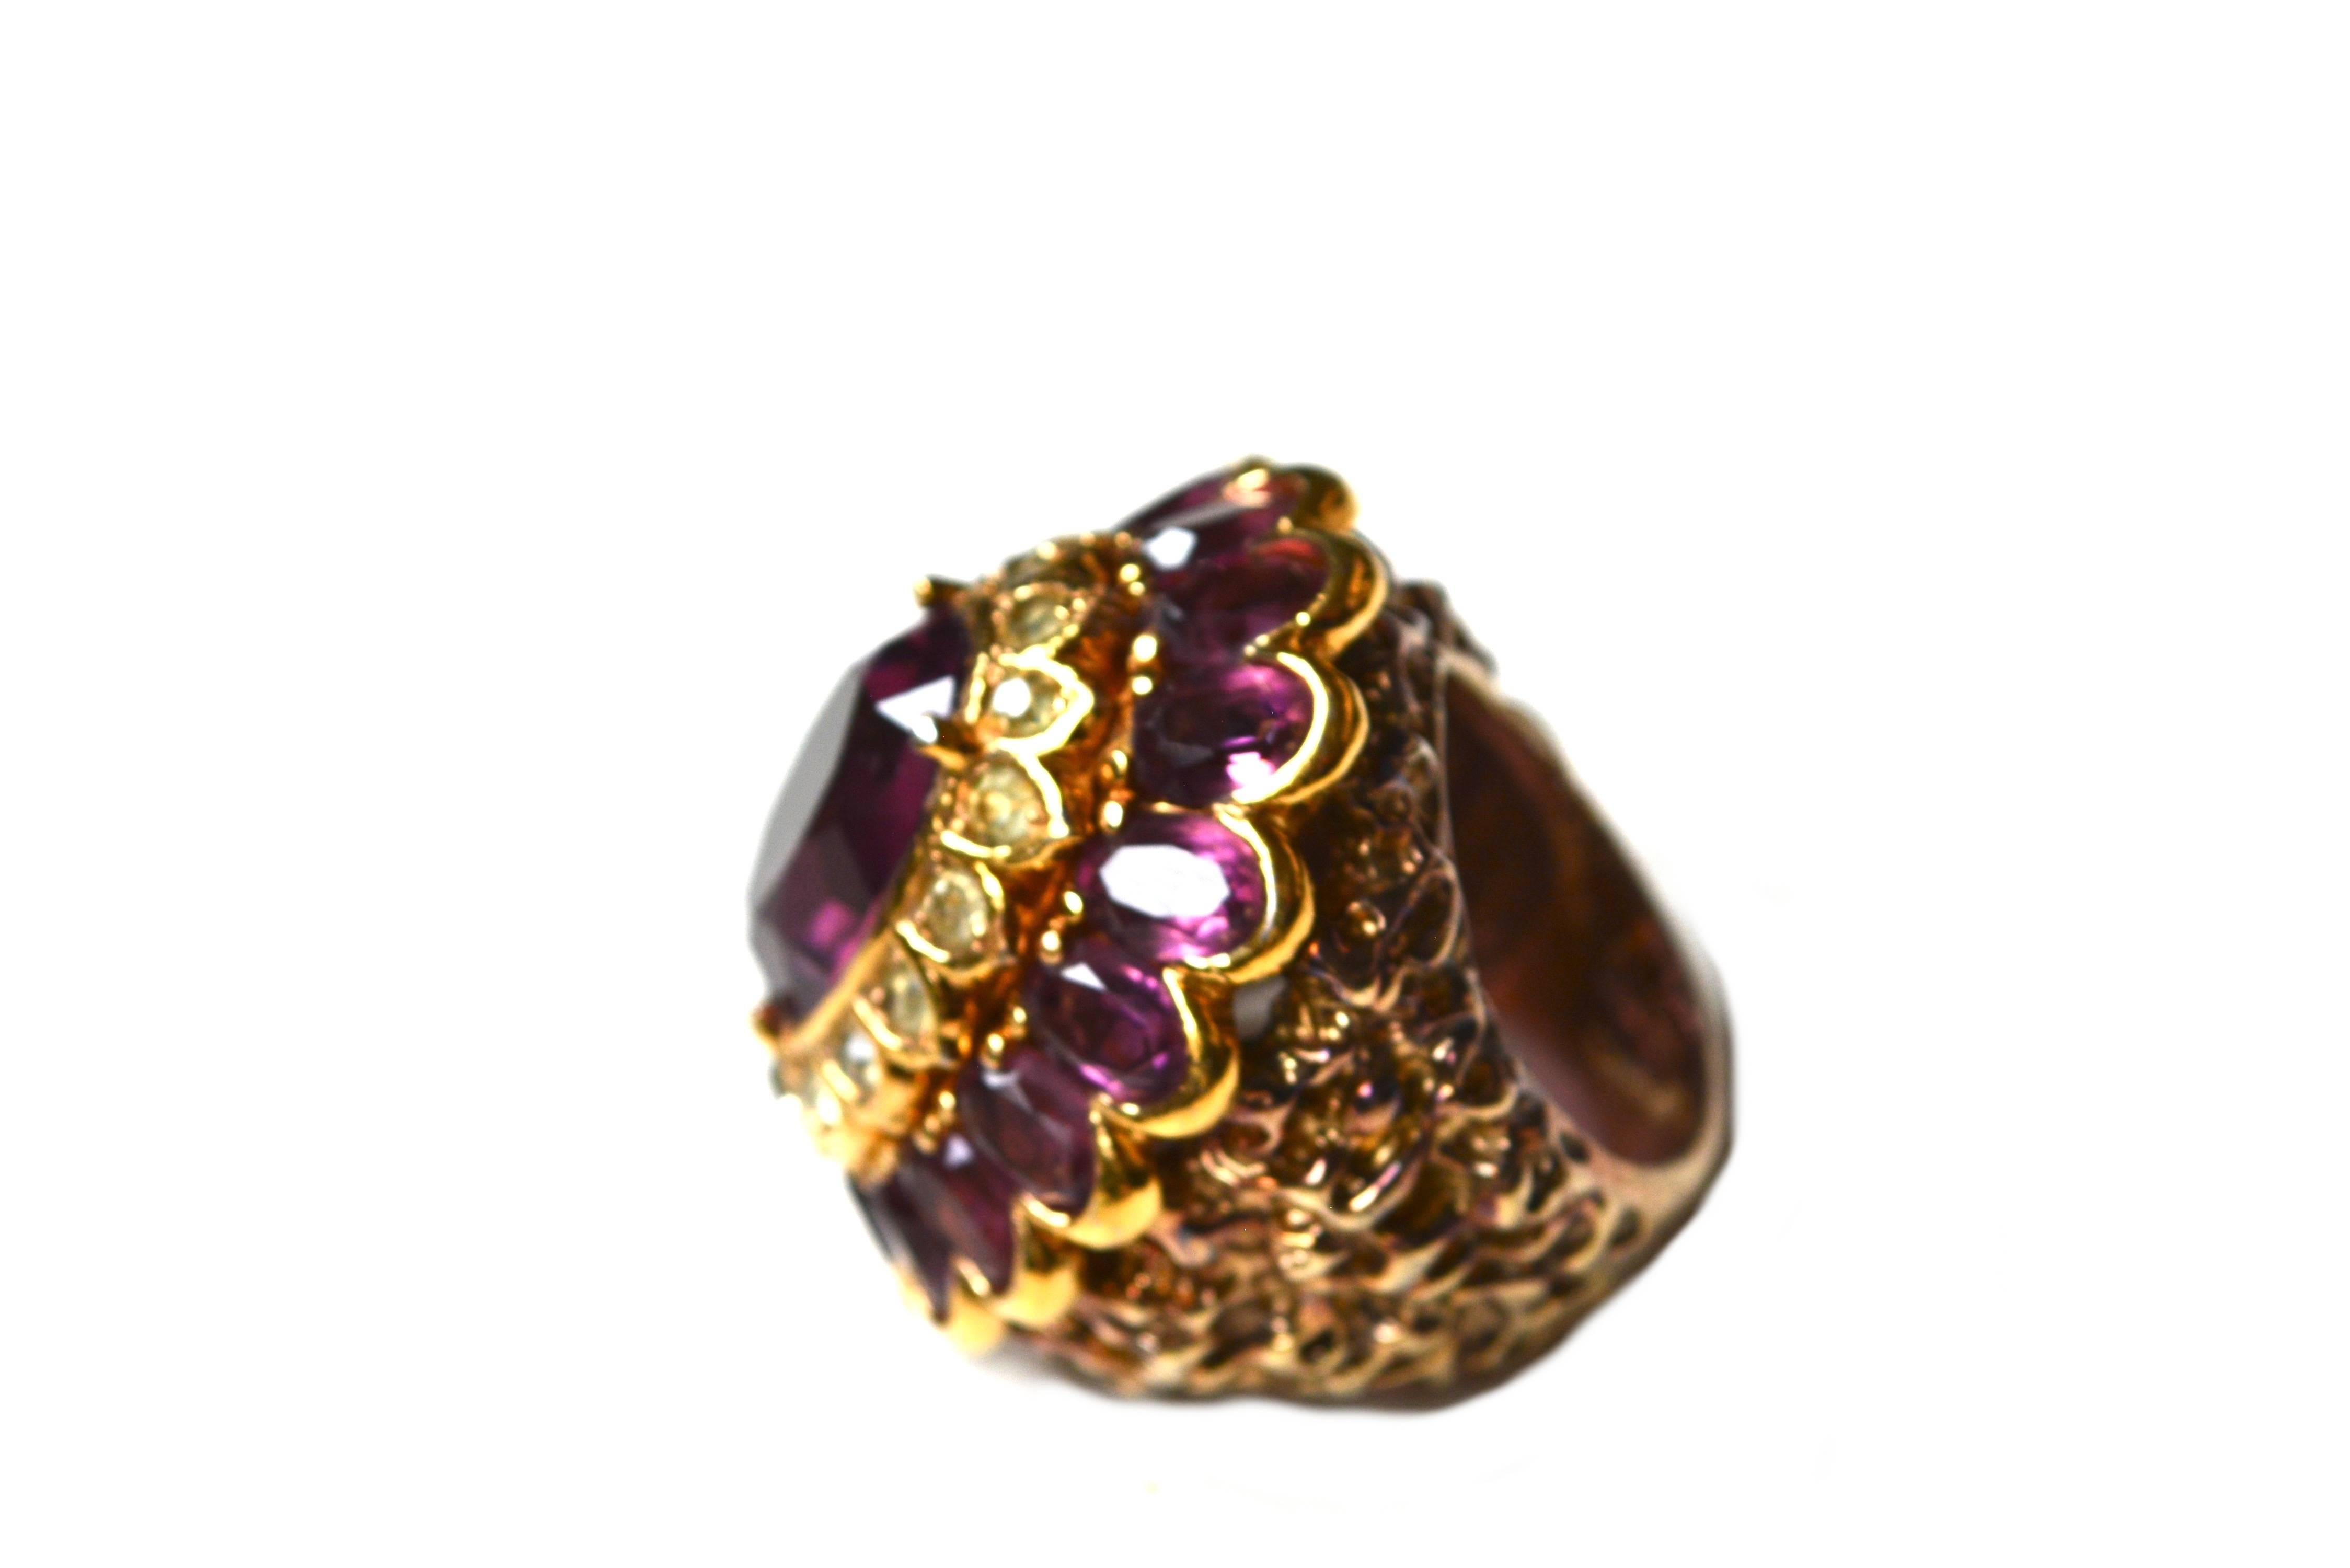 Large grape colored signed Panetta cocktail ring with nugget style textured band. Marked sterling with a golden finish. 1.75